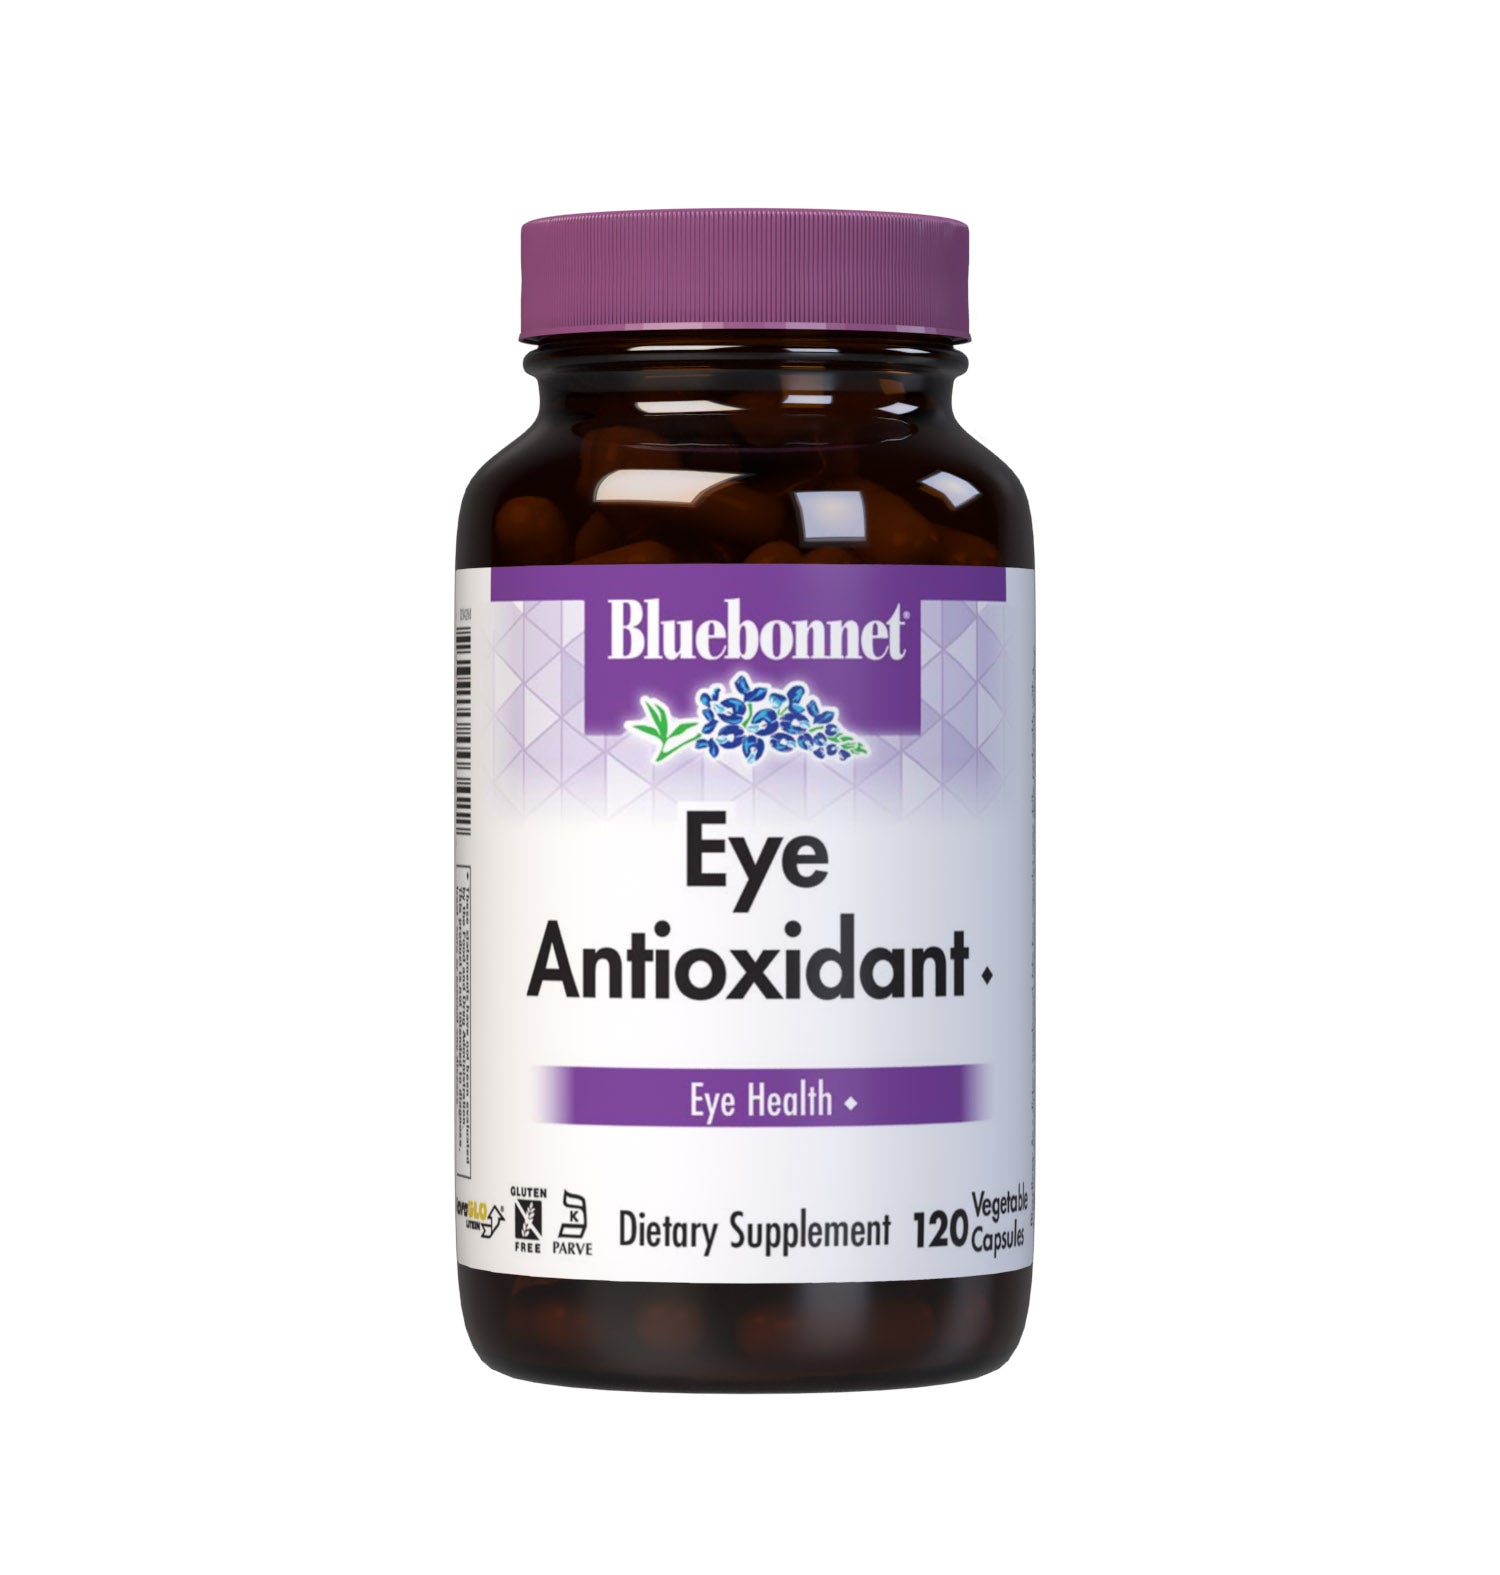 Bluebonnet’s Eye Antioxidant with Zeaxanthin Formula 120 Vegetable Capsules are specially formulated with a high potency combination of all the important amino acid, vitamin, mineral and herbal antioxidants for maintaining eye health. #size_120 count